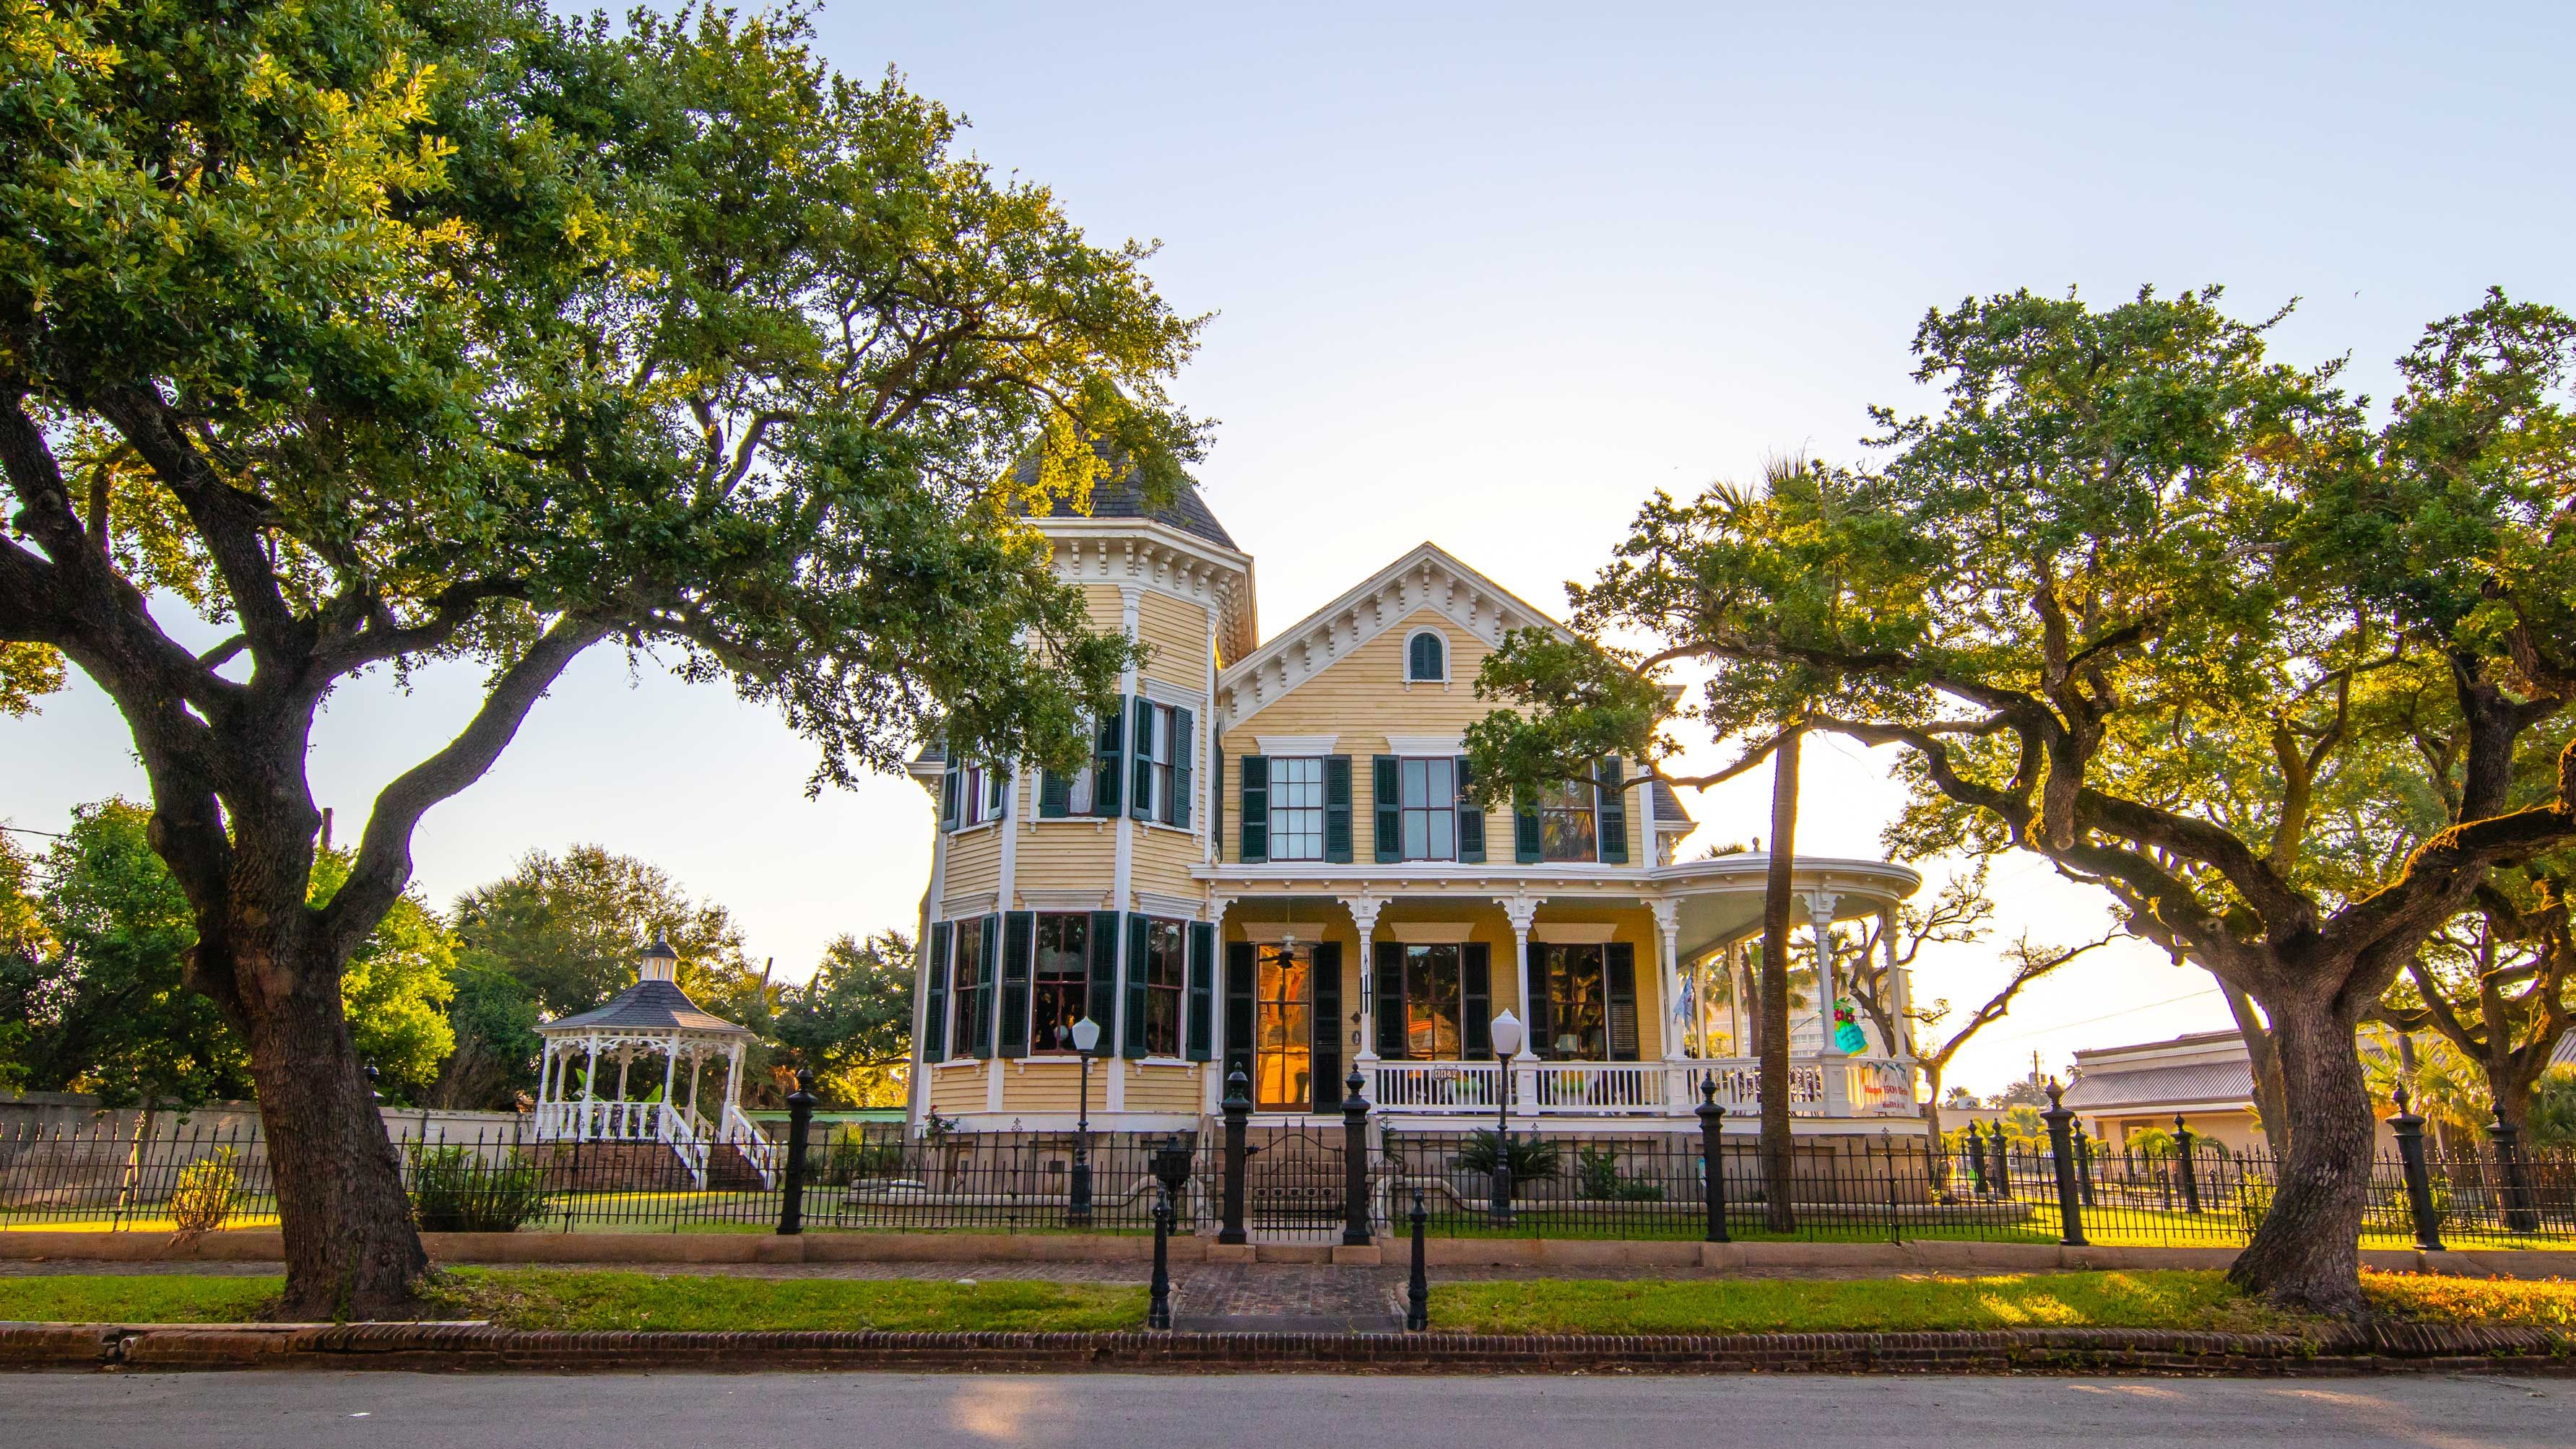 10 best historic small towns in the US, according to readers